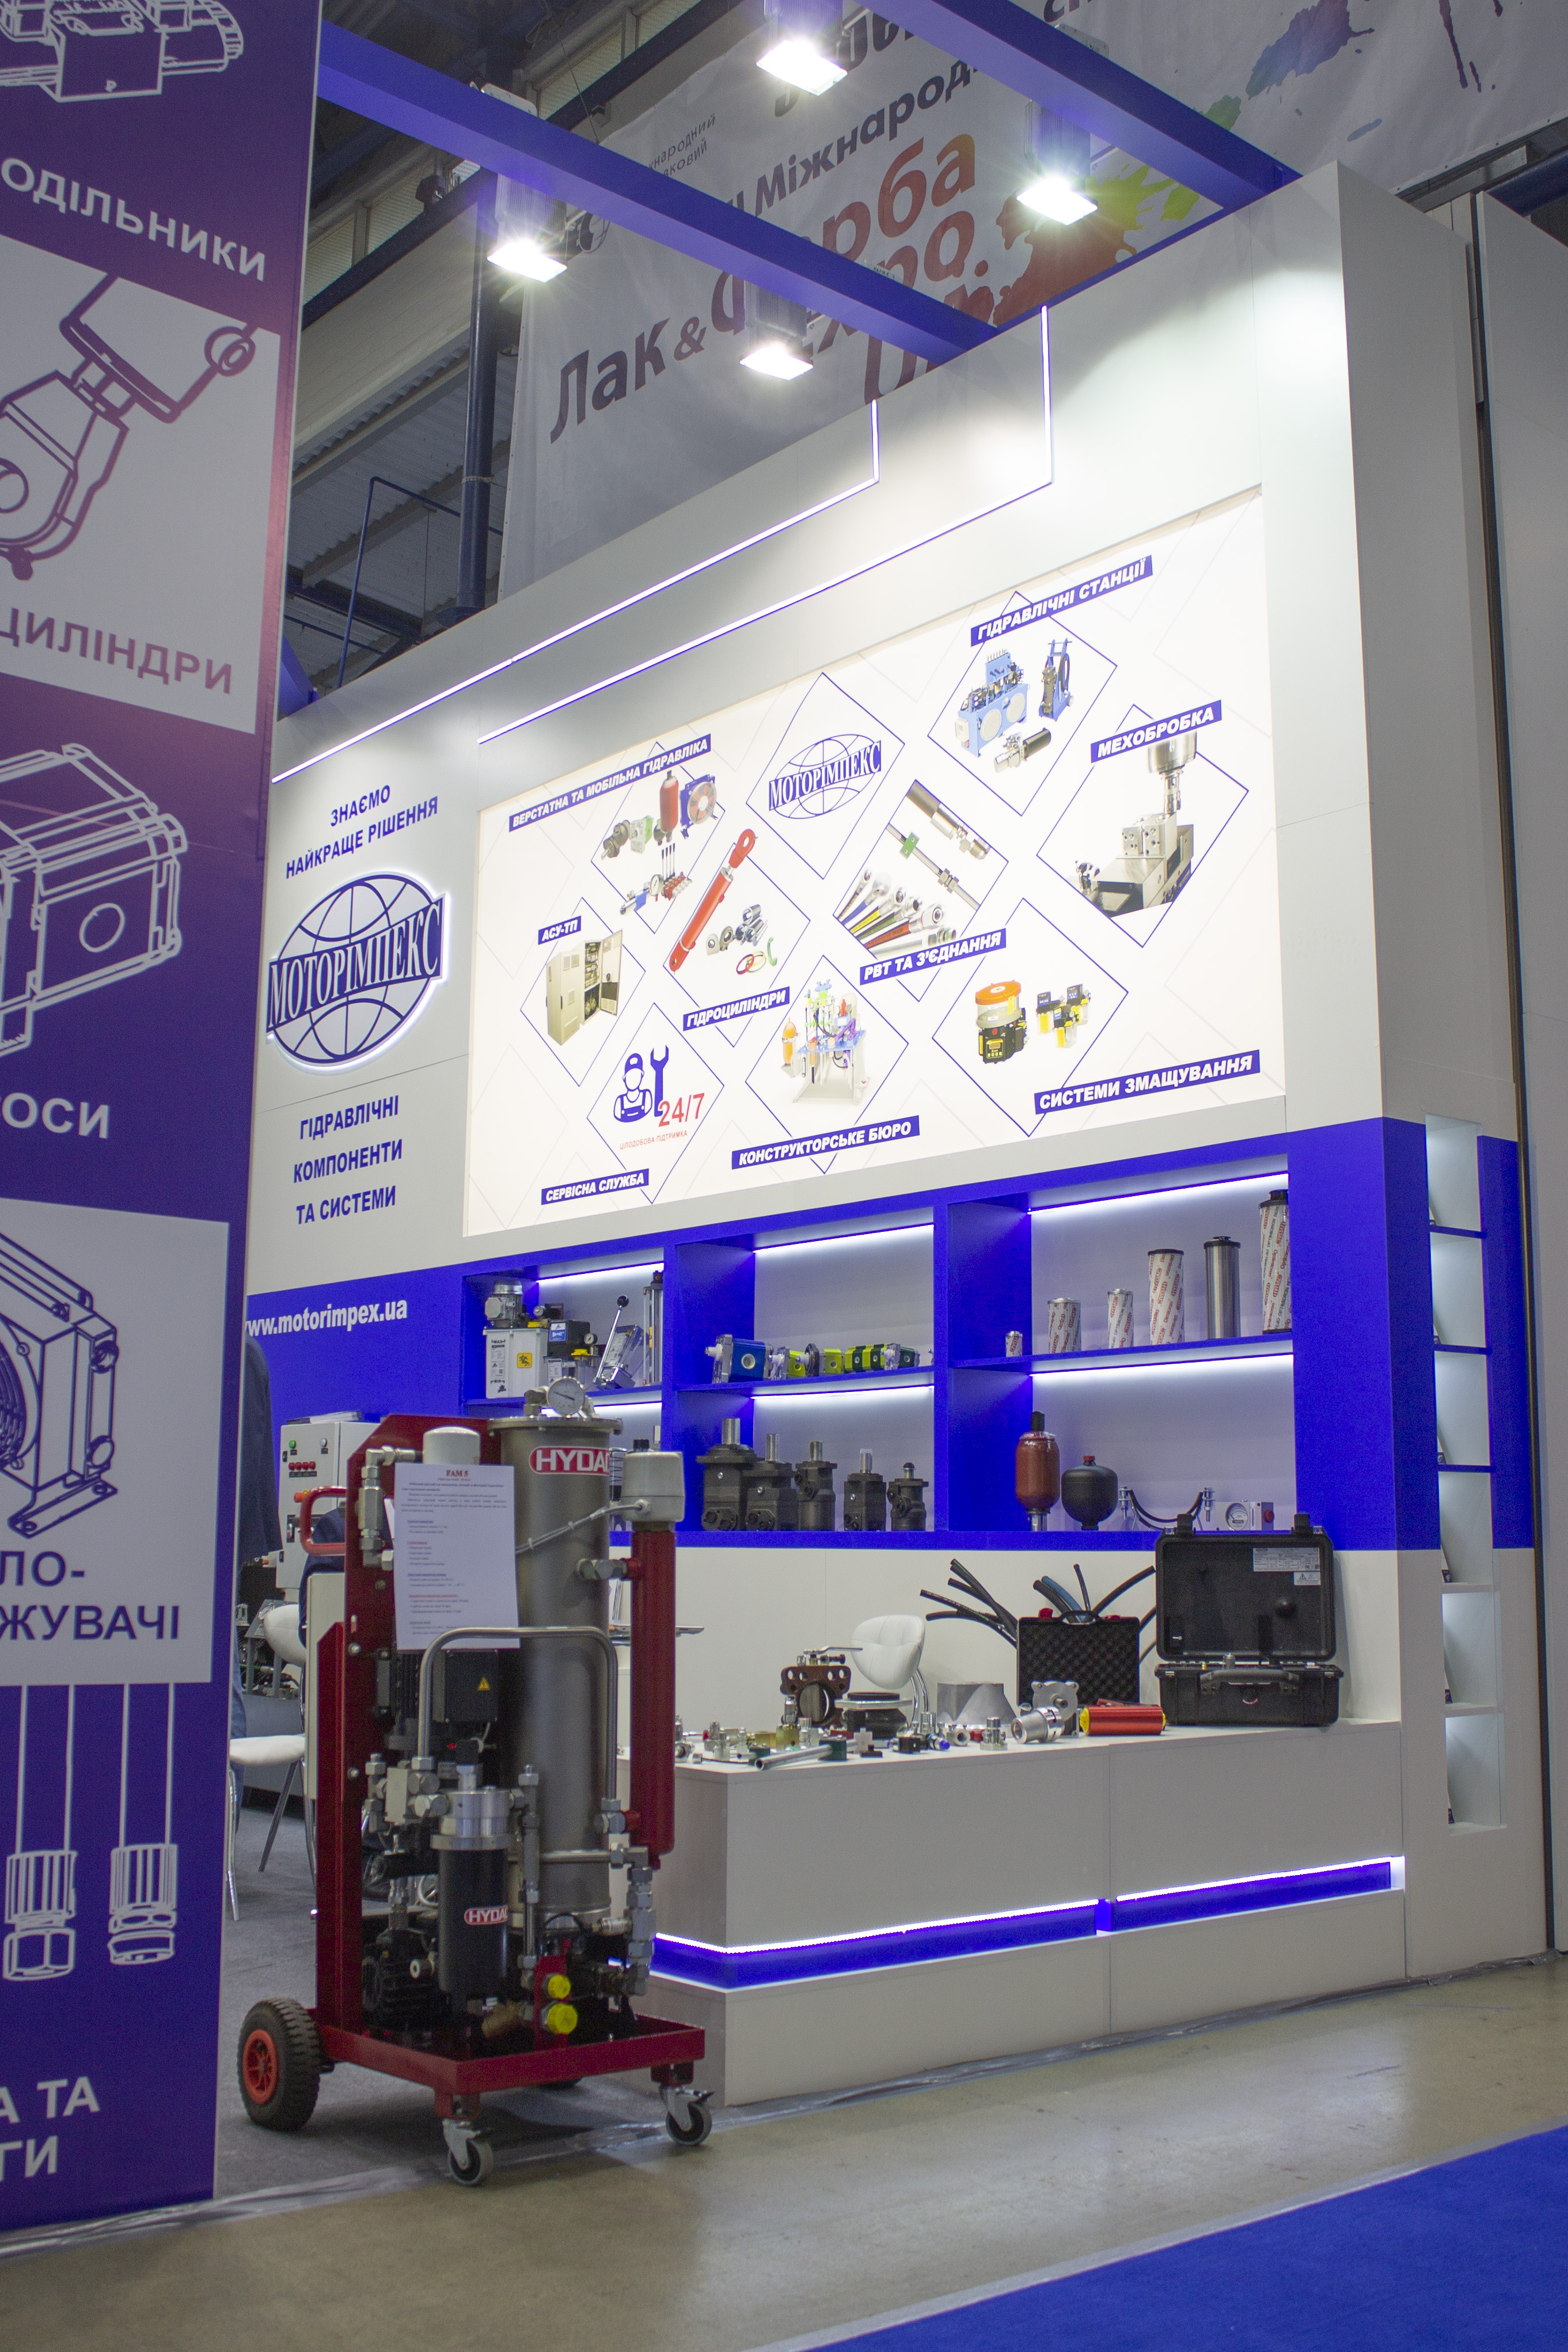 Hydraulic equipment at the stand of the Motorimpex group of companies